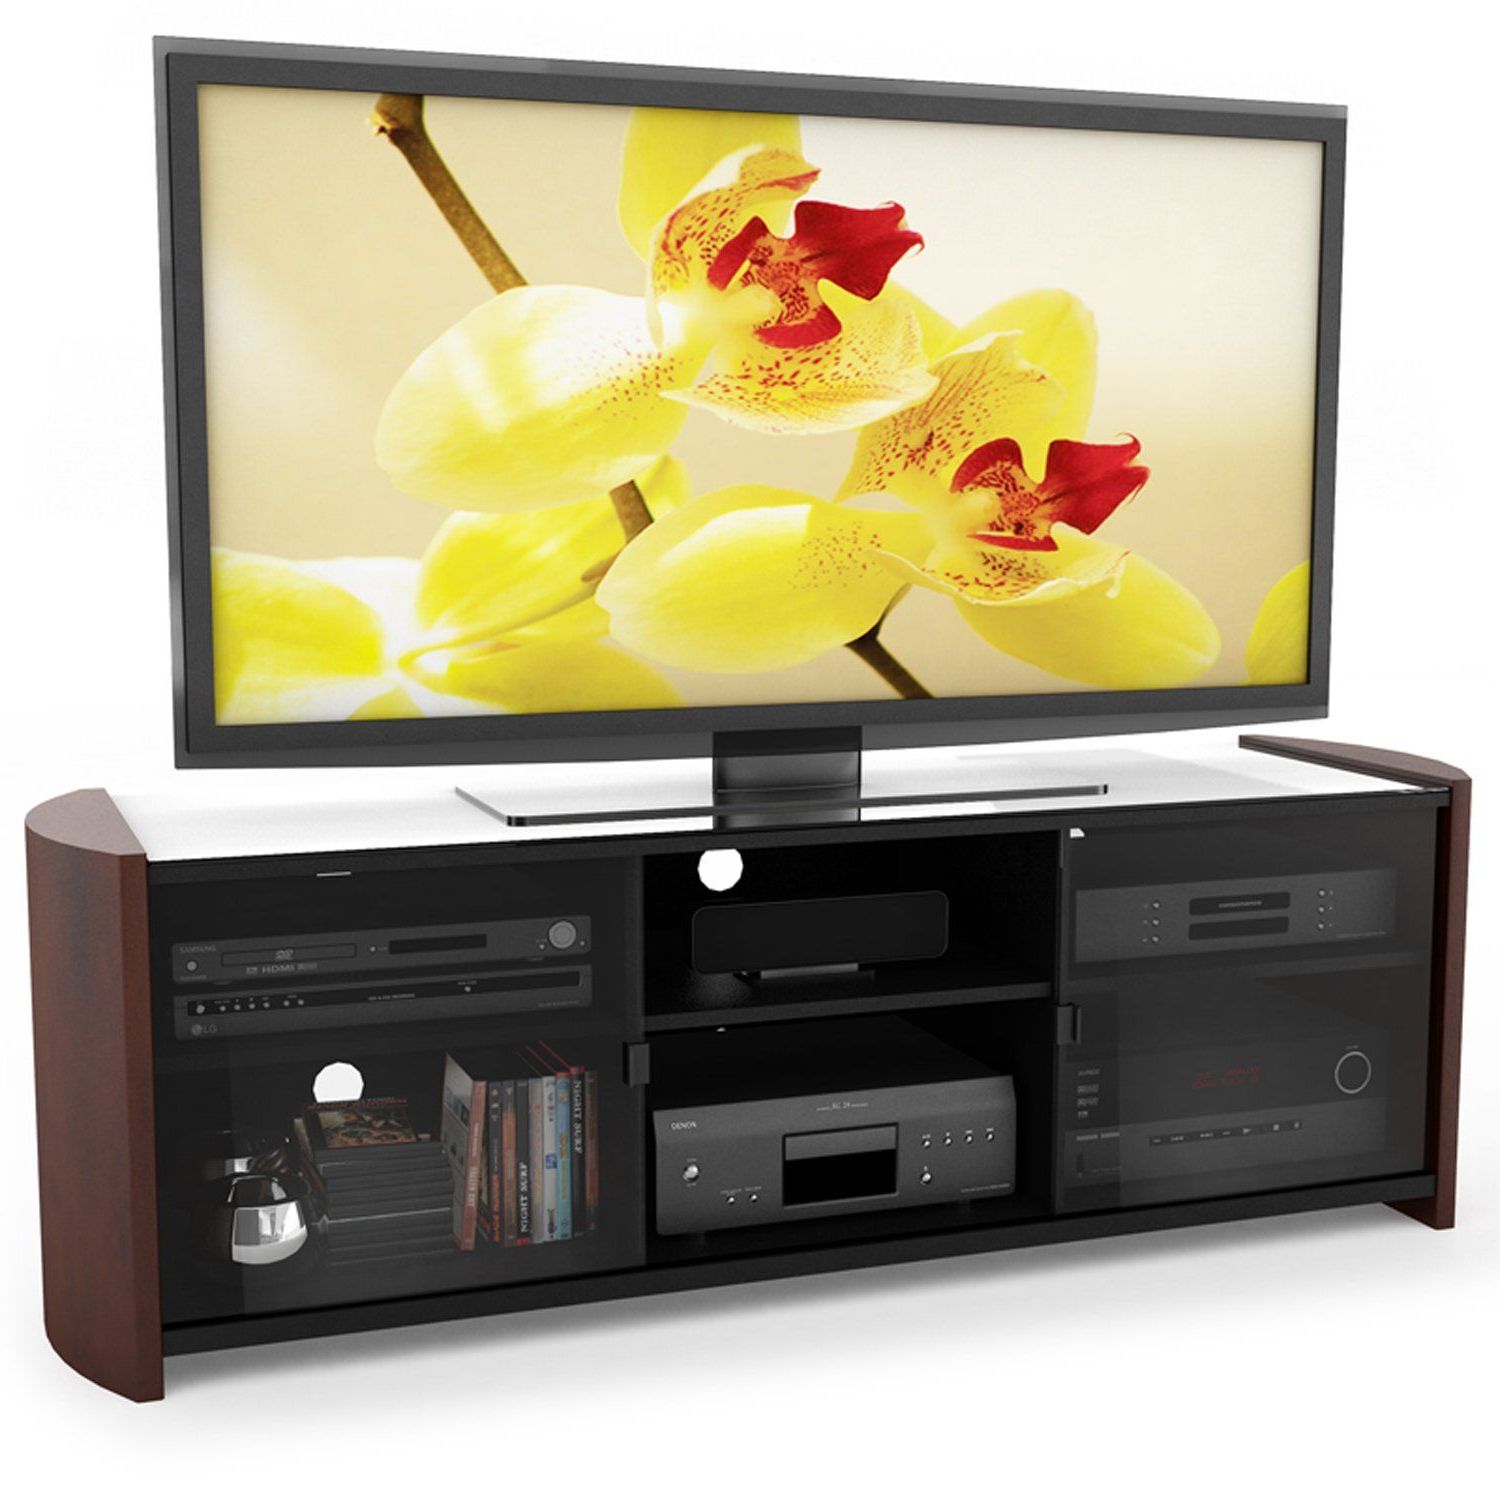 Sonax Ml 3609 Milan Tv Bench With Real Wood Veneer, 60 Inch In Popular Sonax Tv Stands (View 2 of 20)